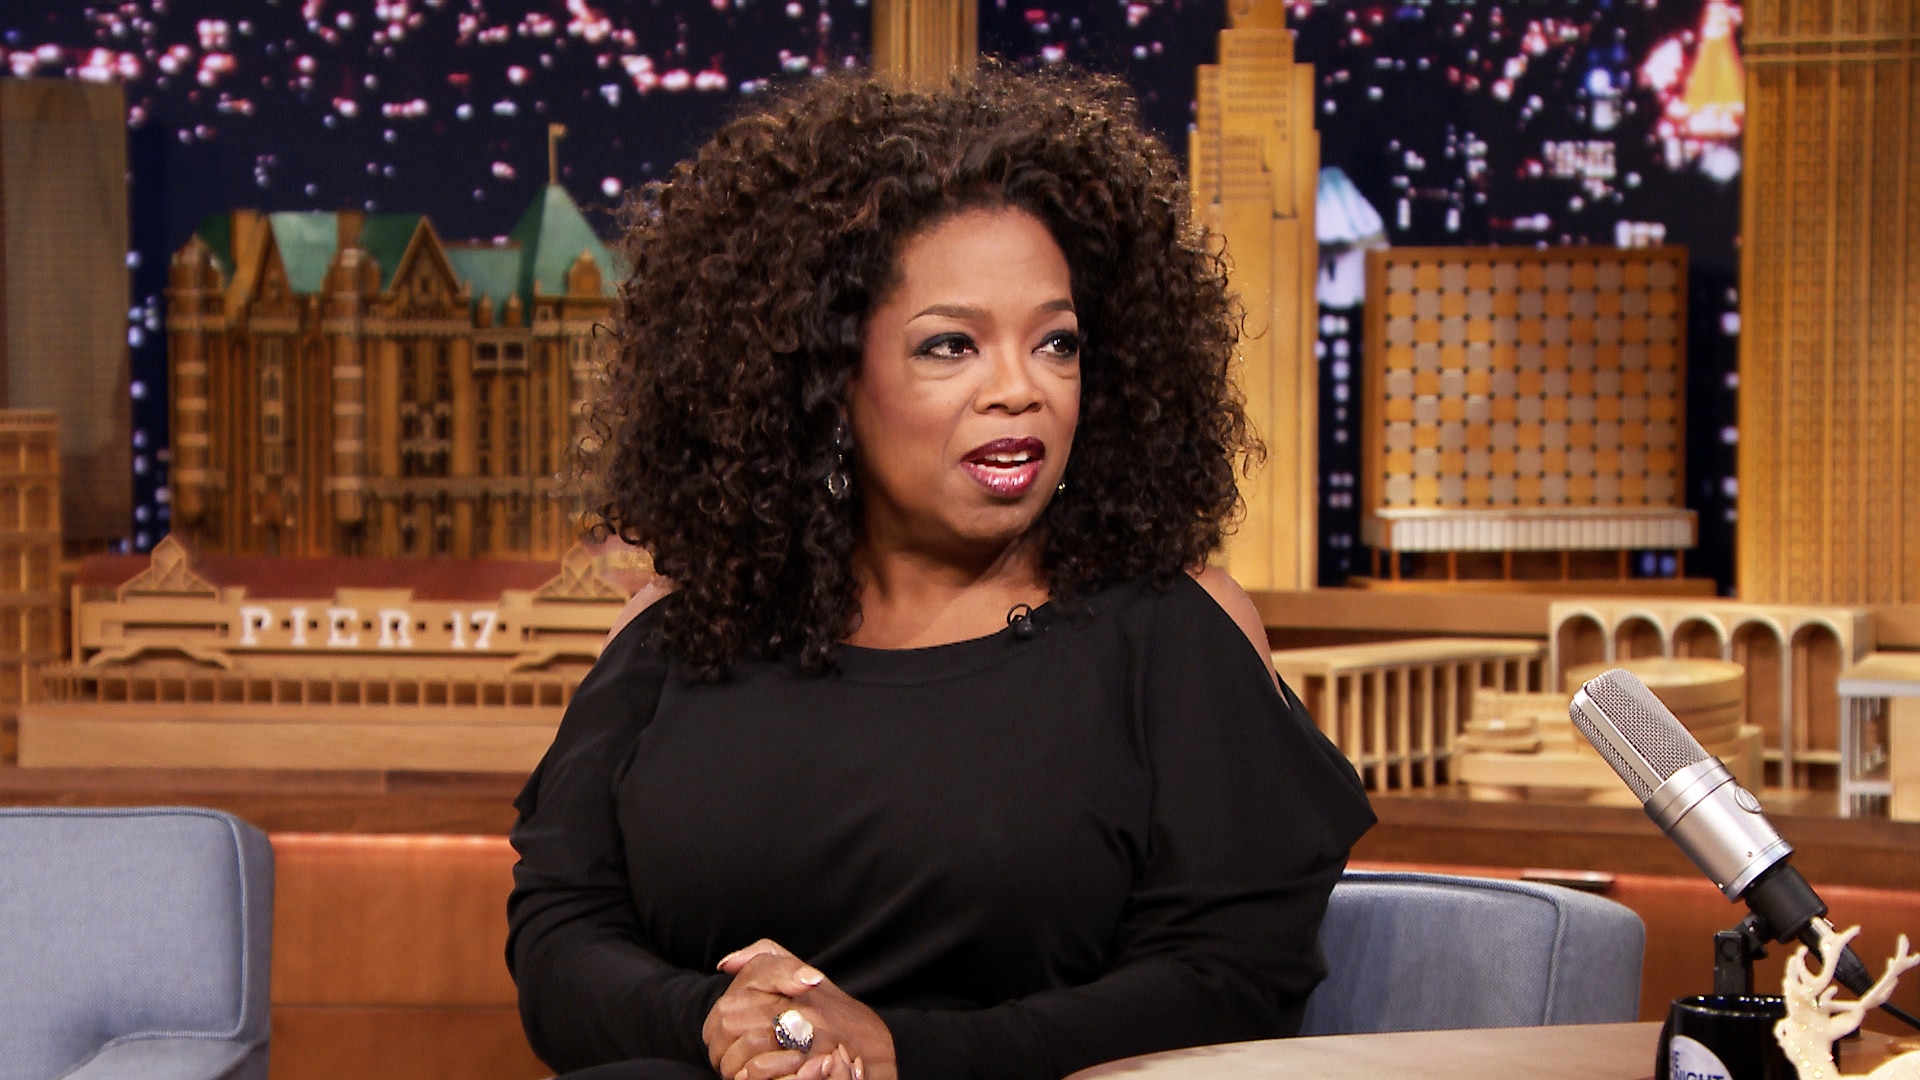 Shaping A Network With Oprah's View